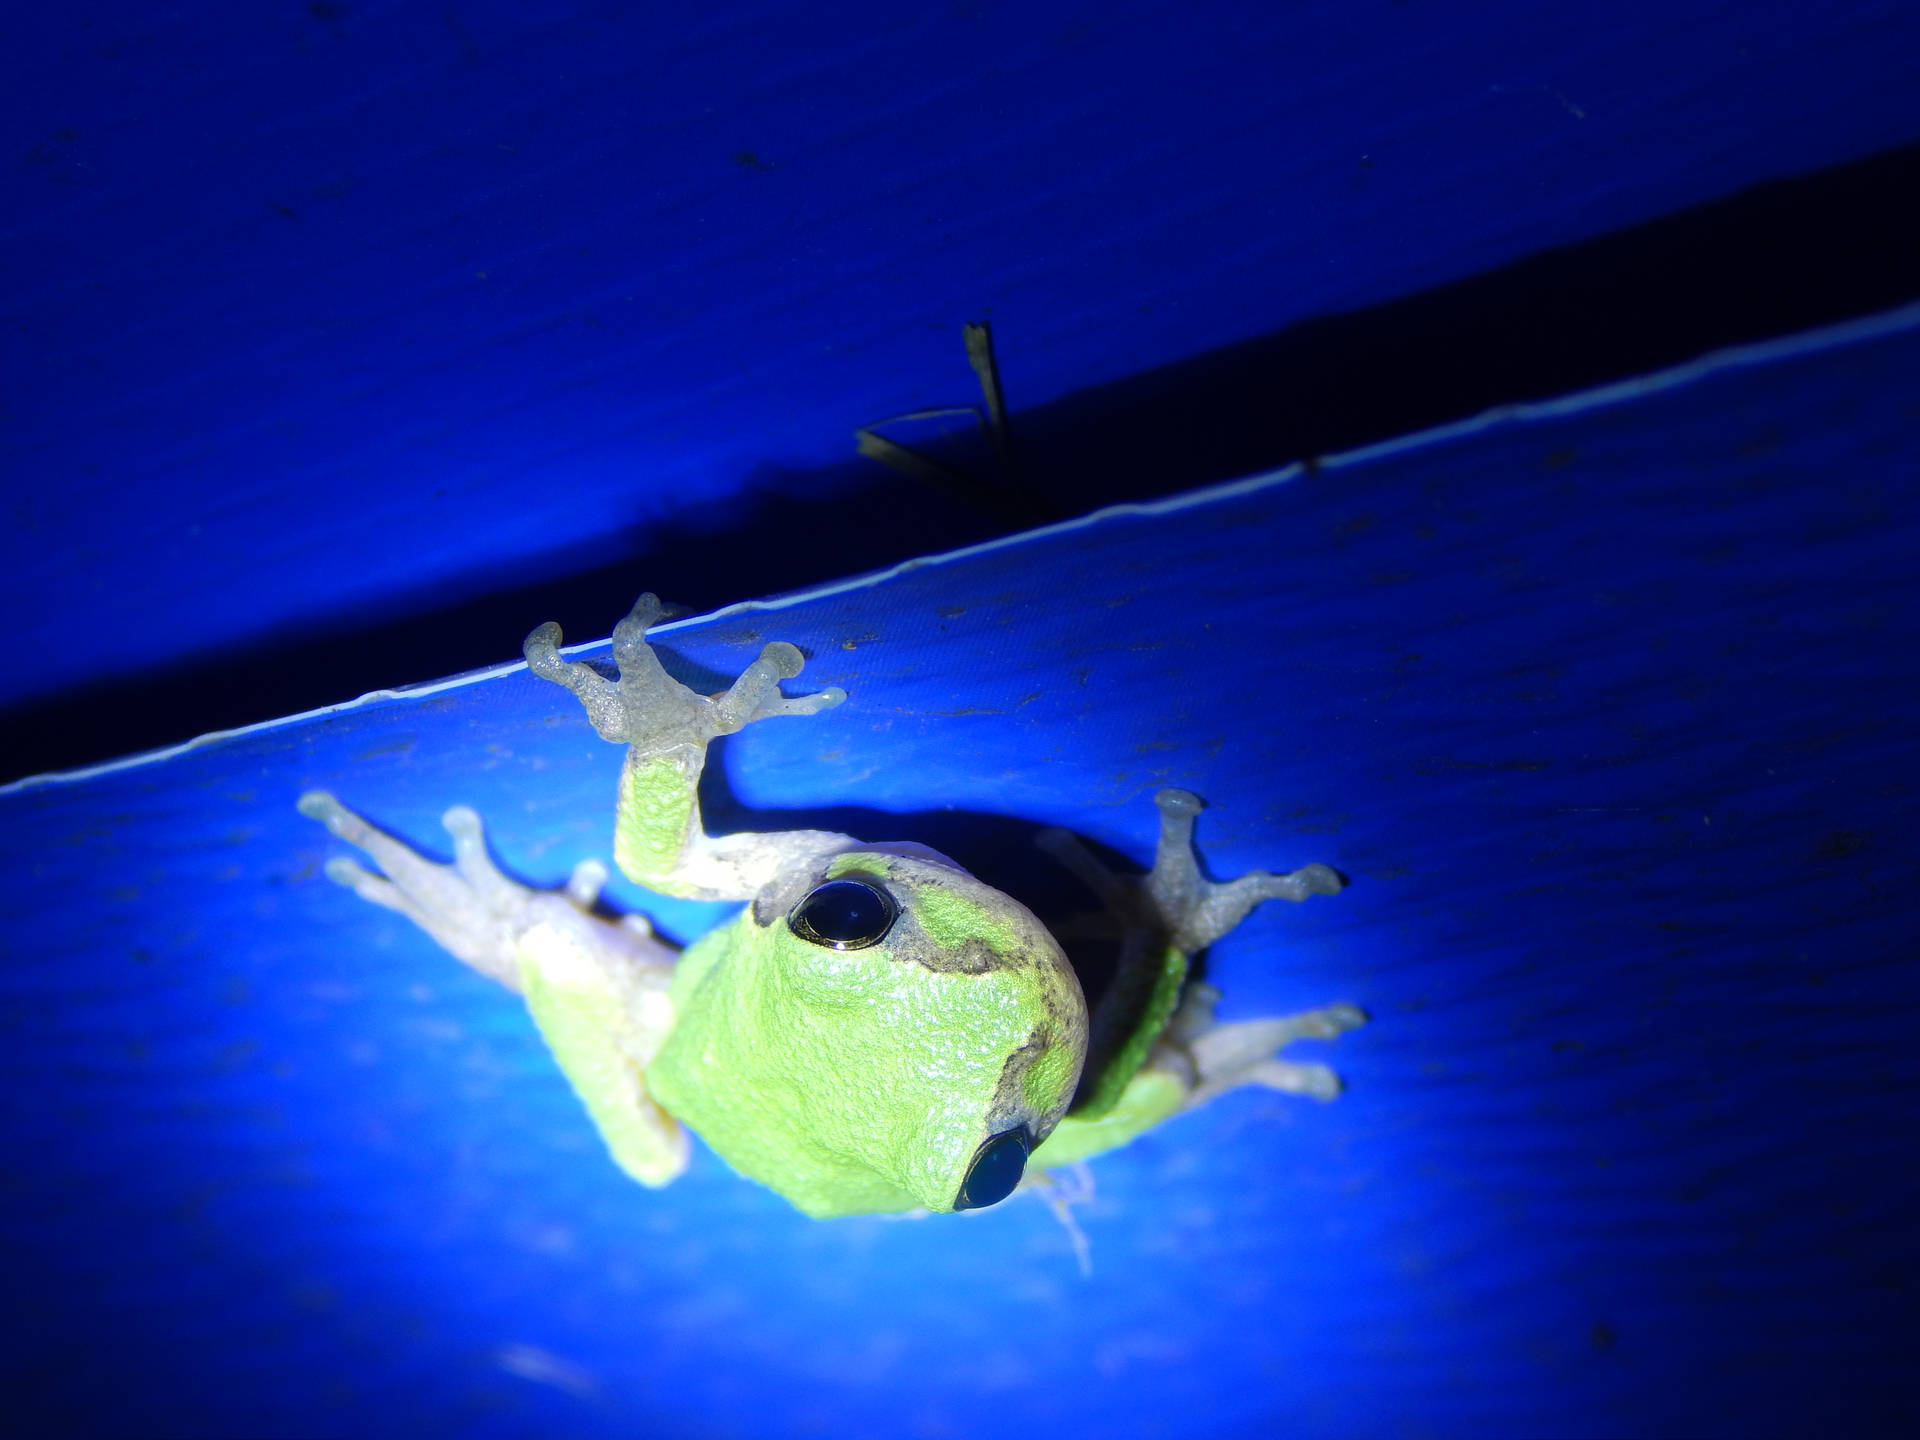 Cute Frog With Glowing Green Skin